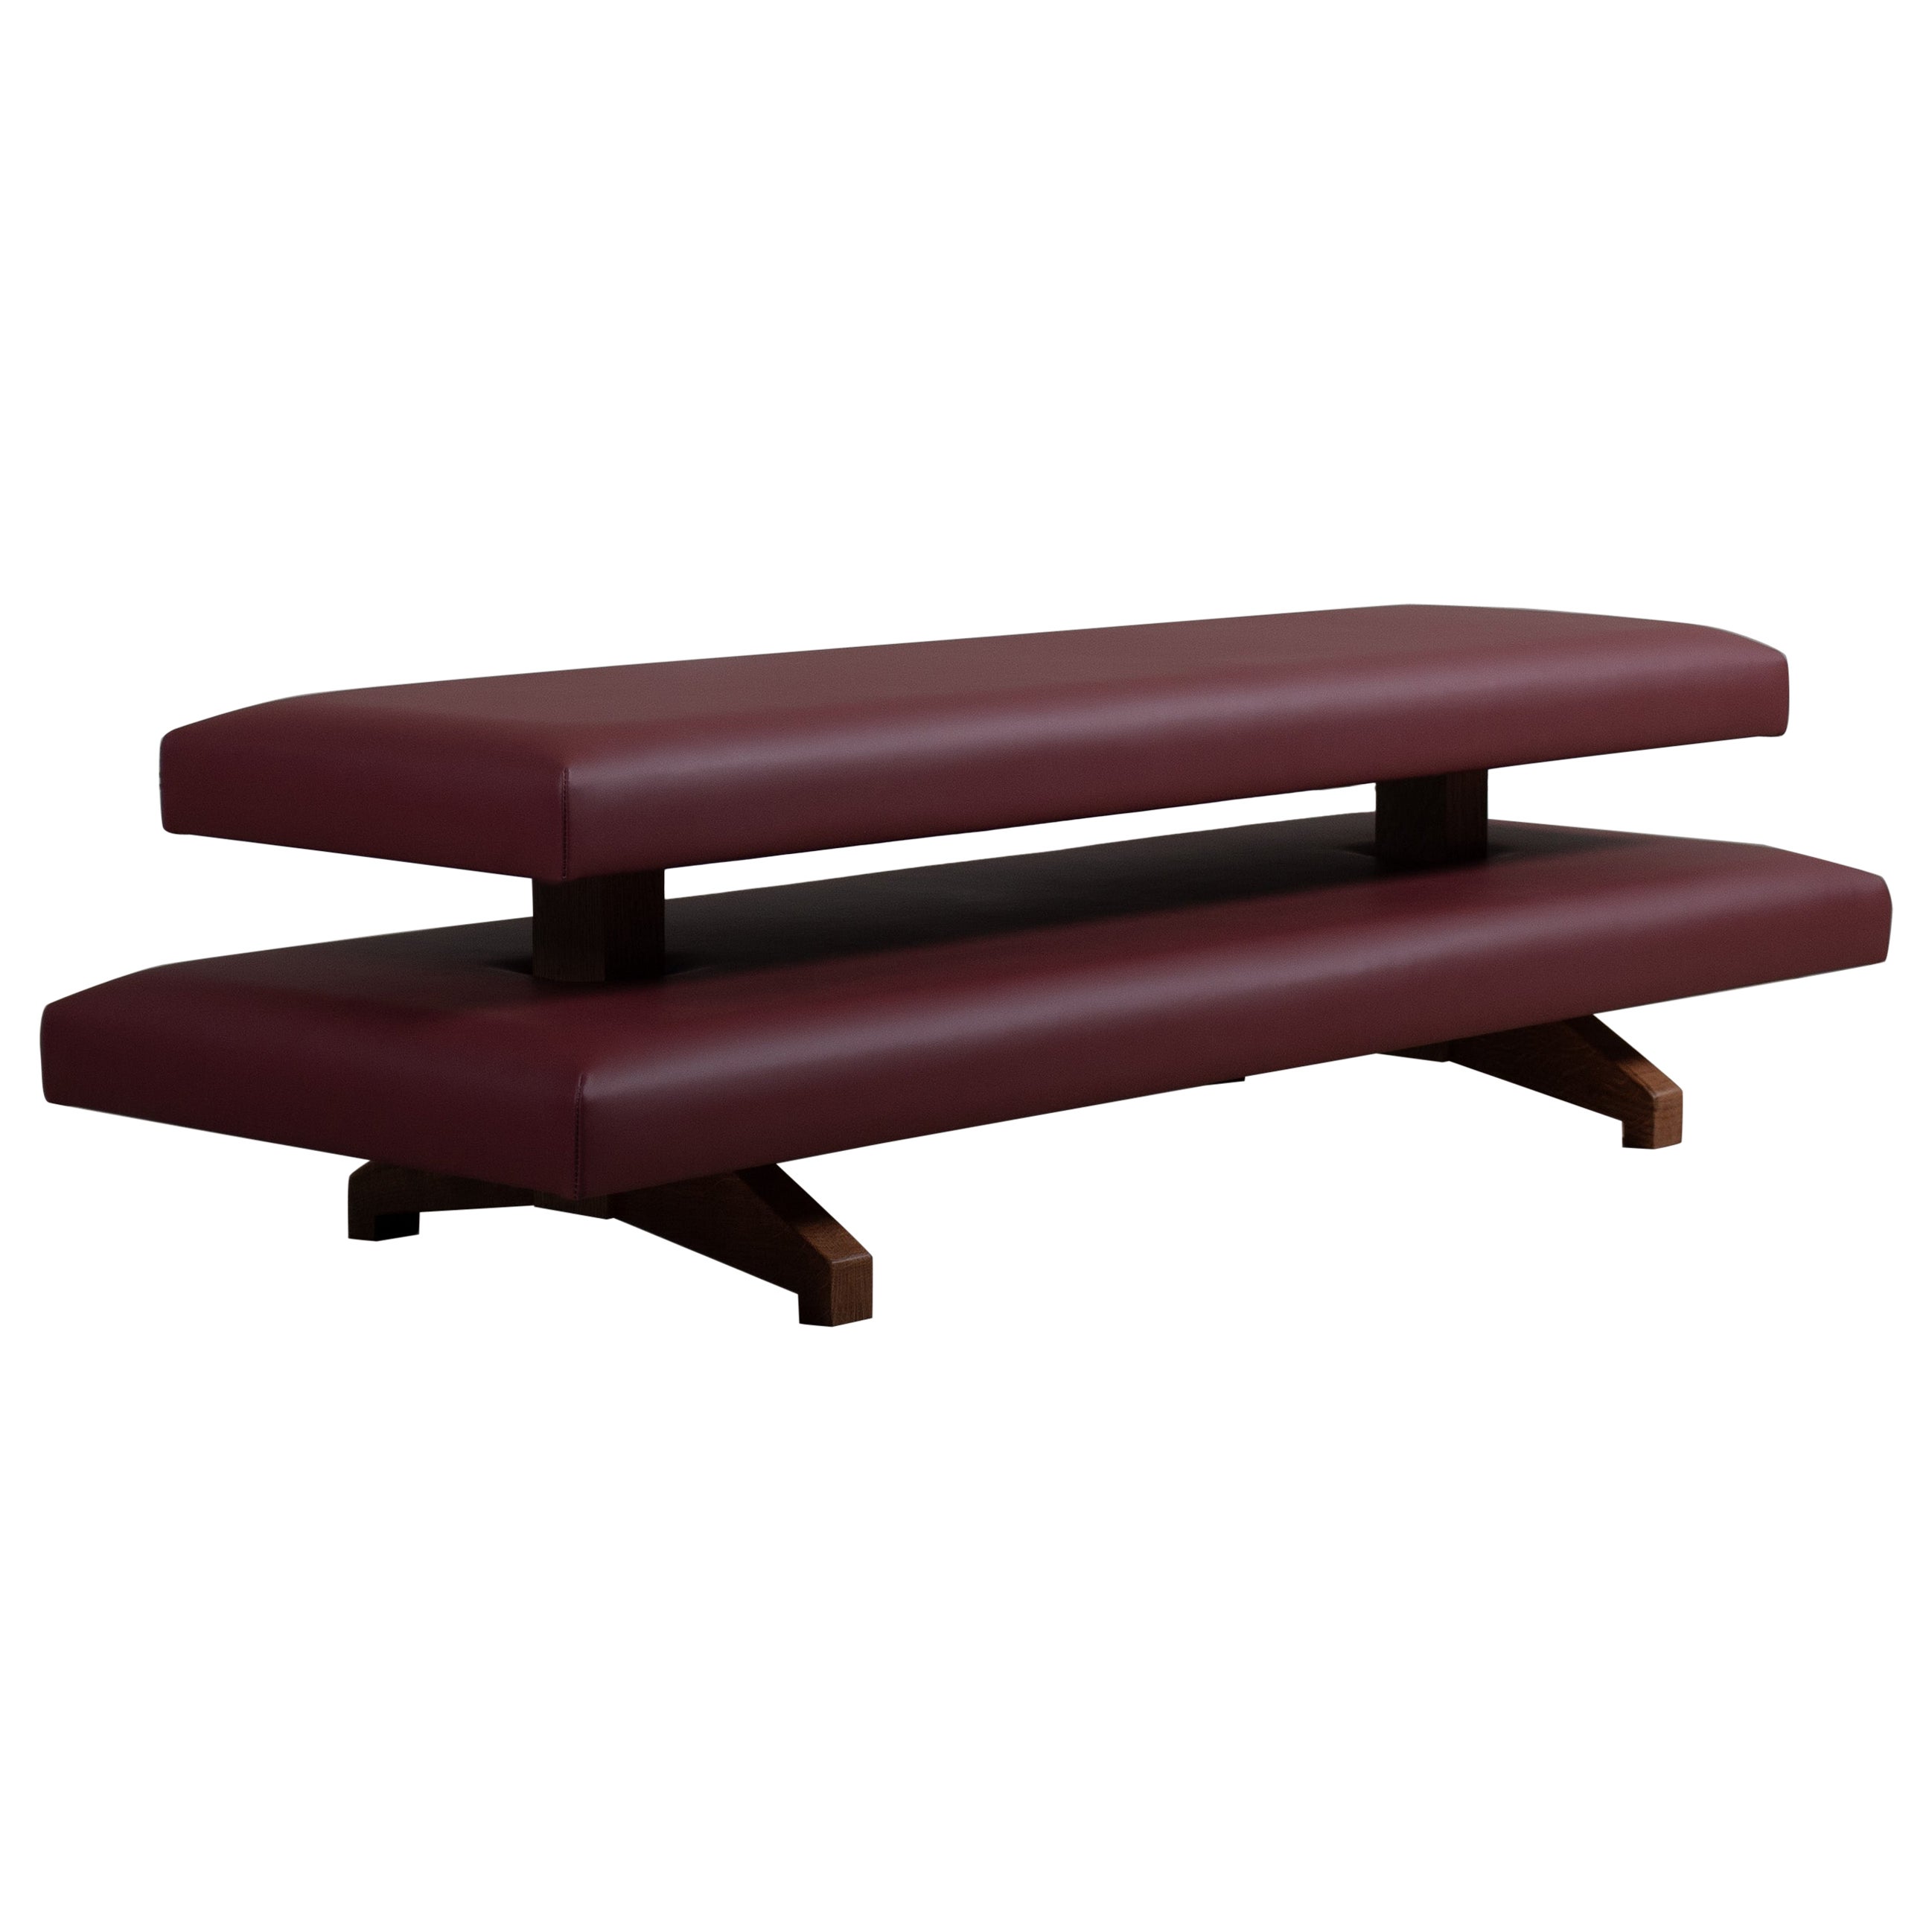 Handcrafted Leather & Oak Sofa Table Footstool